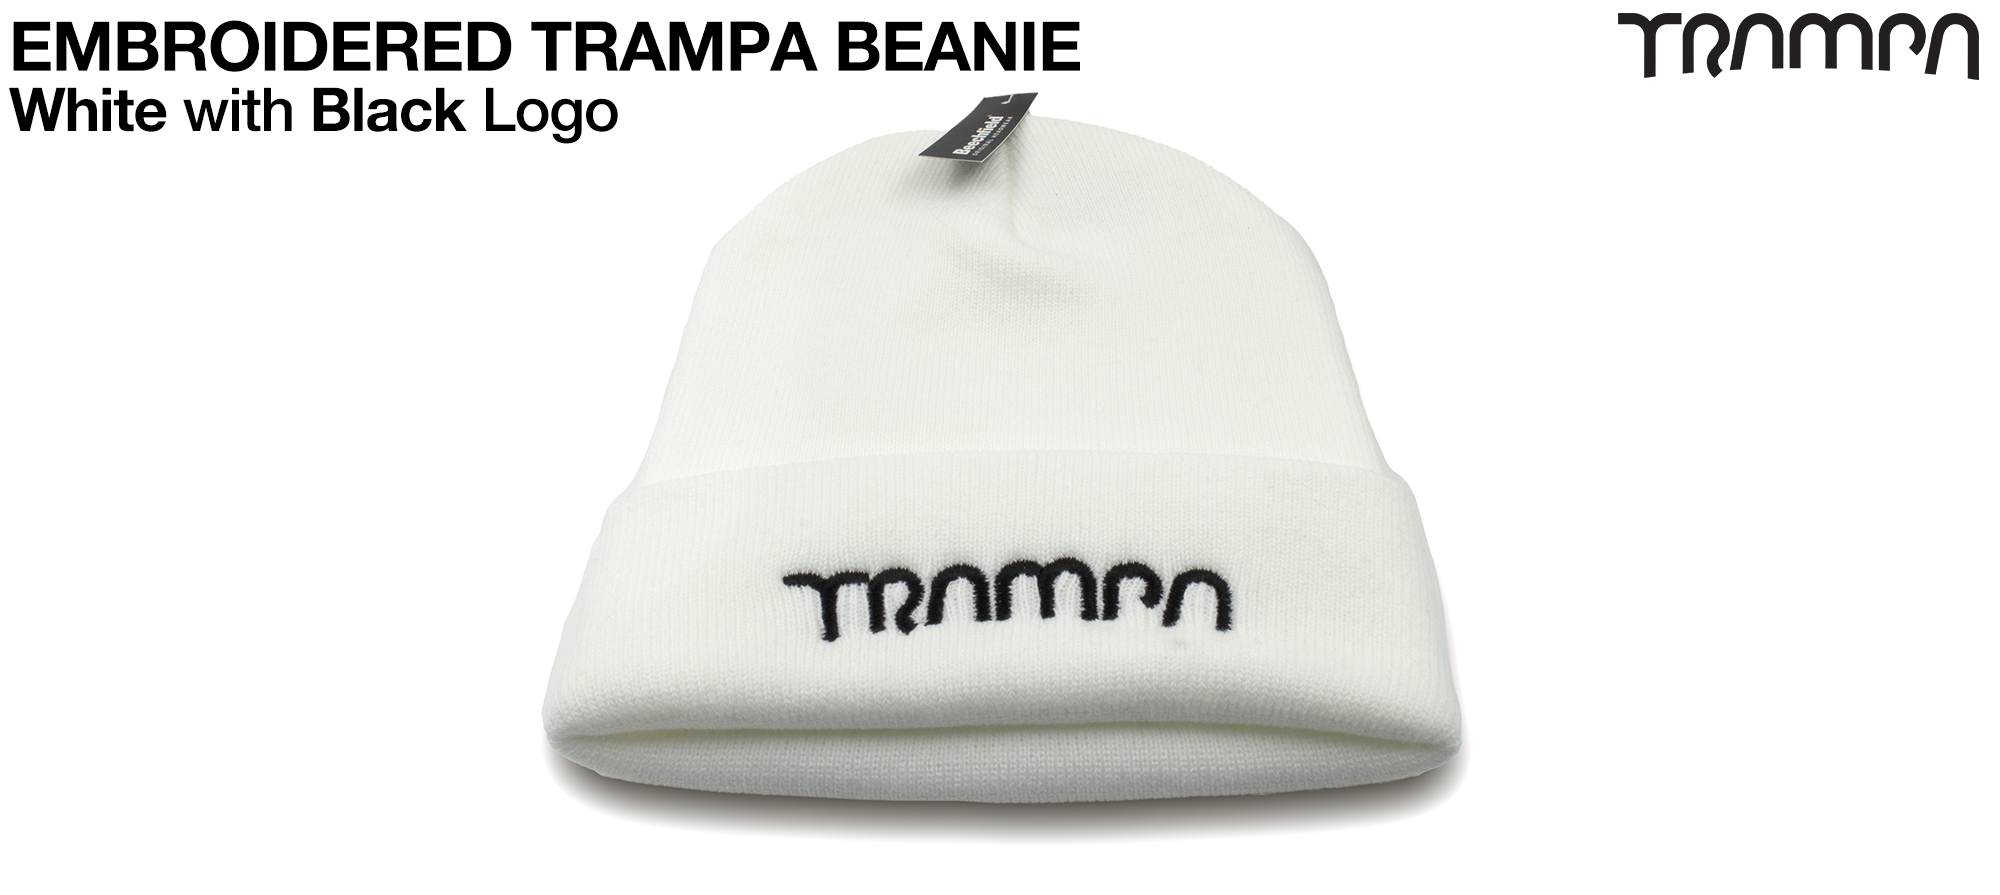 Snow WHITE Woolly hat with BLACK Embroidered TRAMPA logo (£12.50)